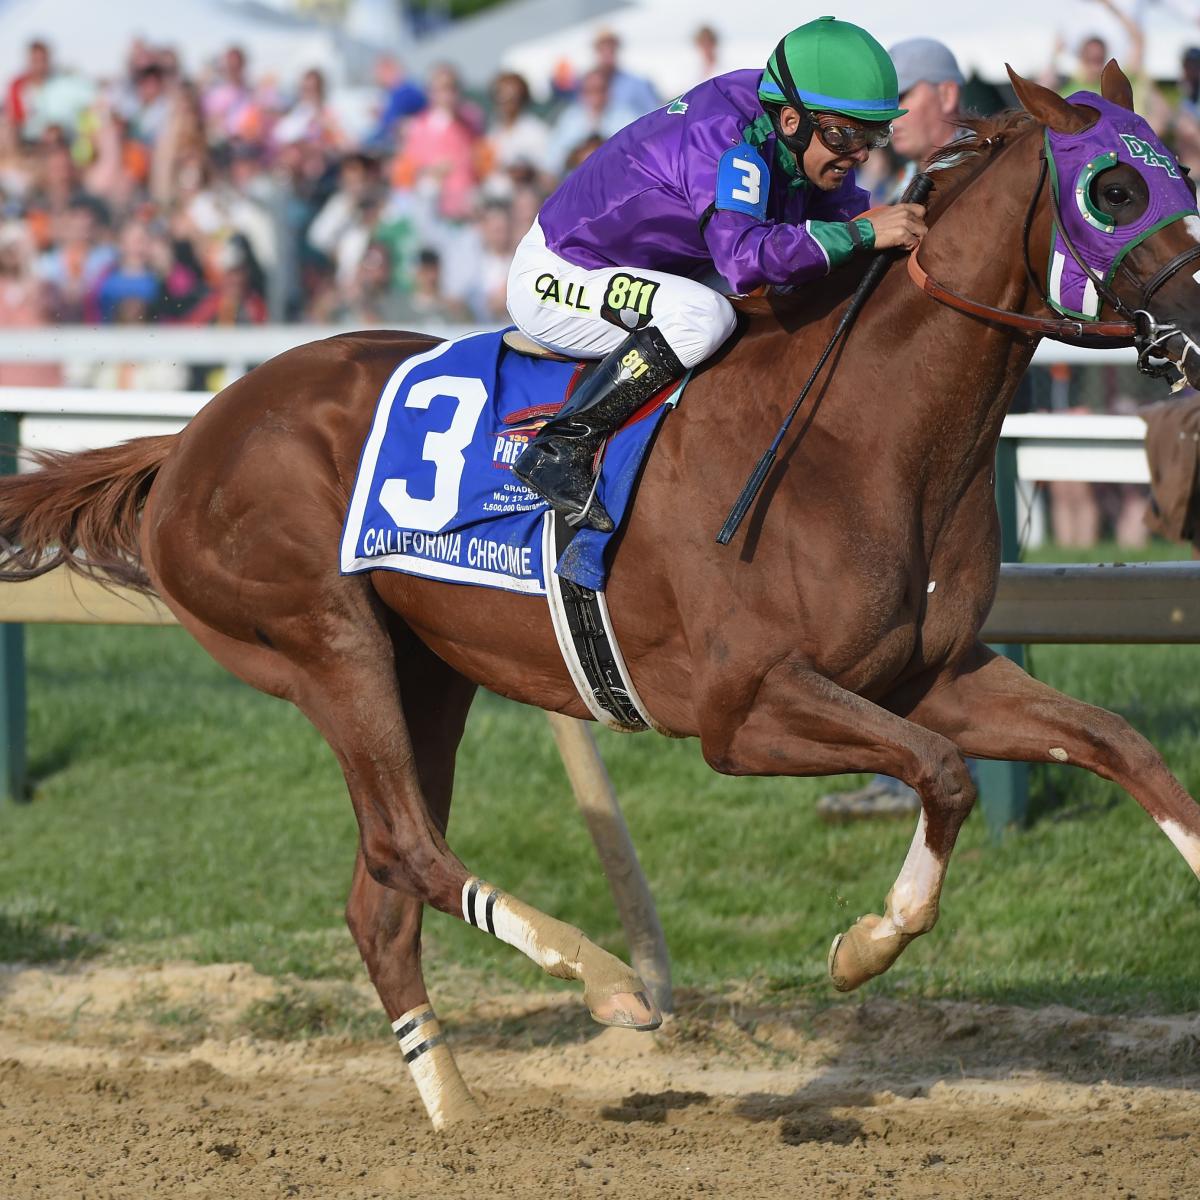 Preakness Results 2014 Examining Race Results, Replay Video and More